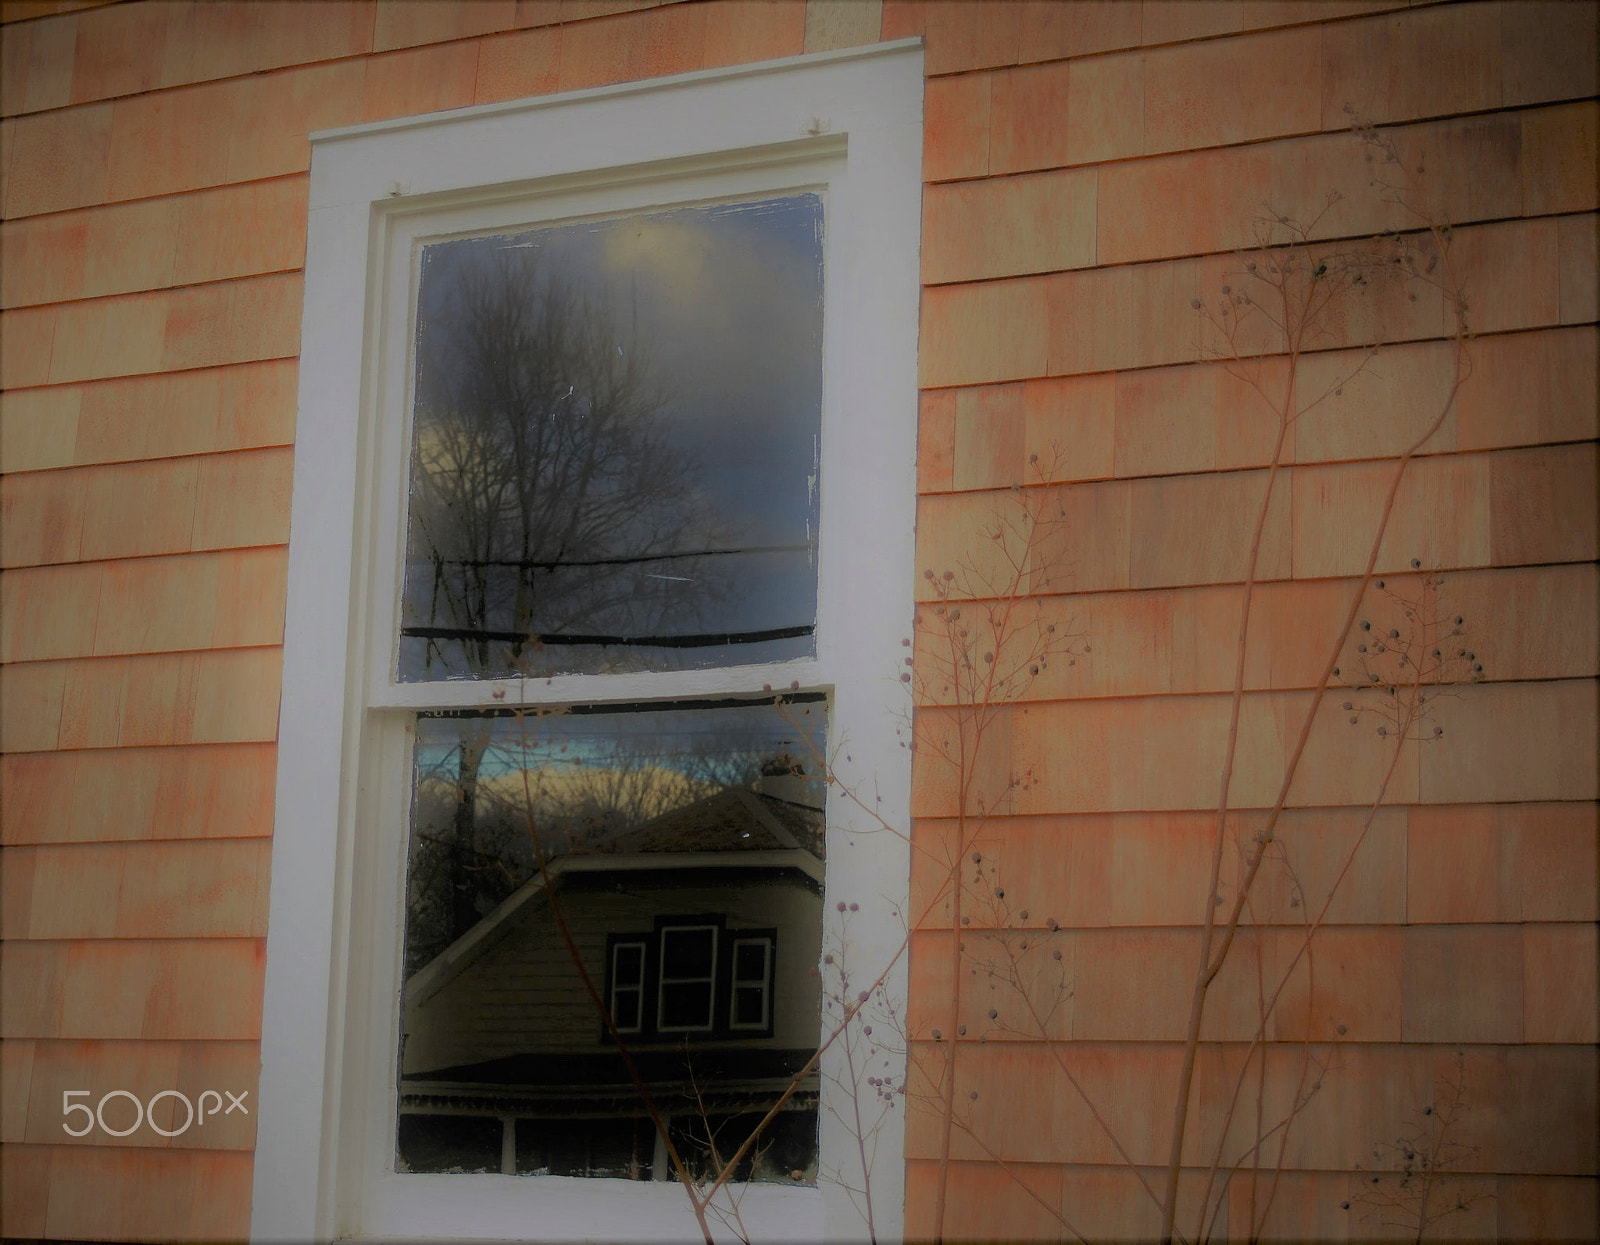 Nikon D200 sample photo. Reflection from across the street photography